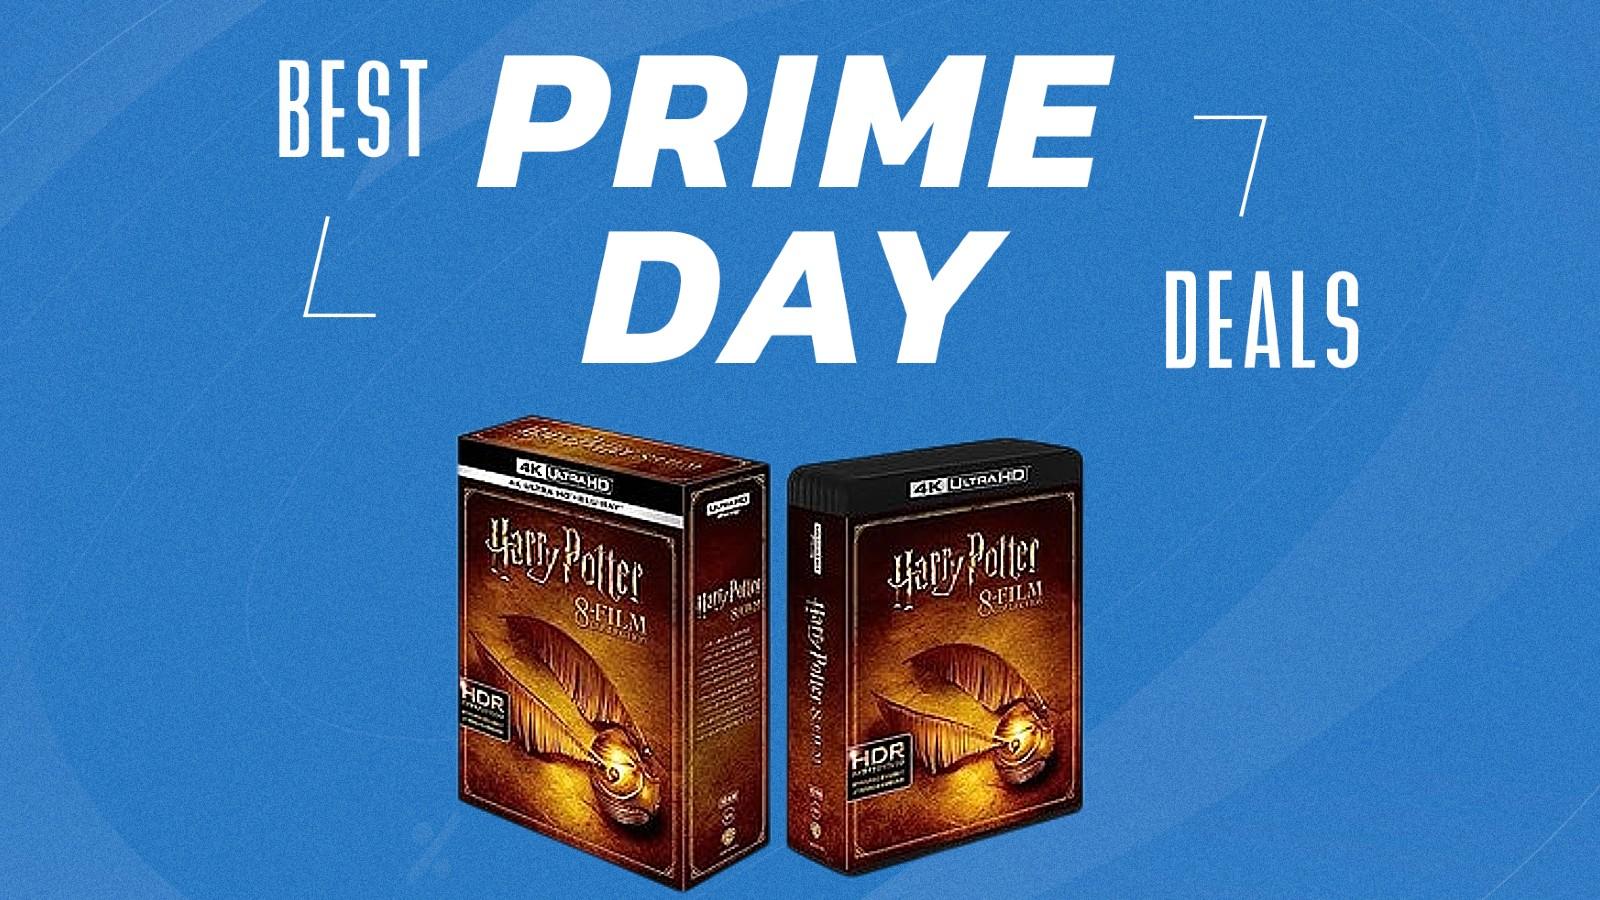 The Harry Potter 4k 8-film collection available as part of the Prime Day movie deals